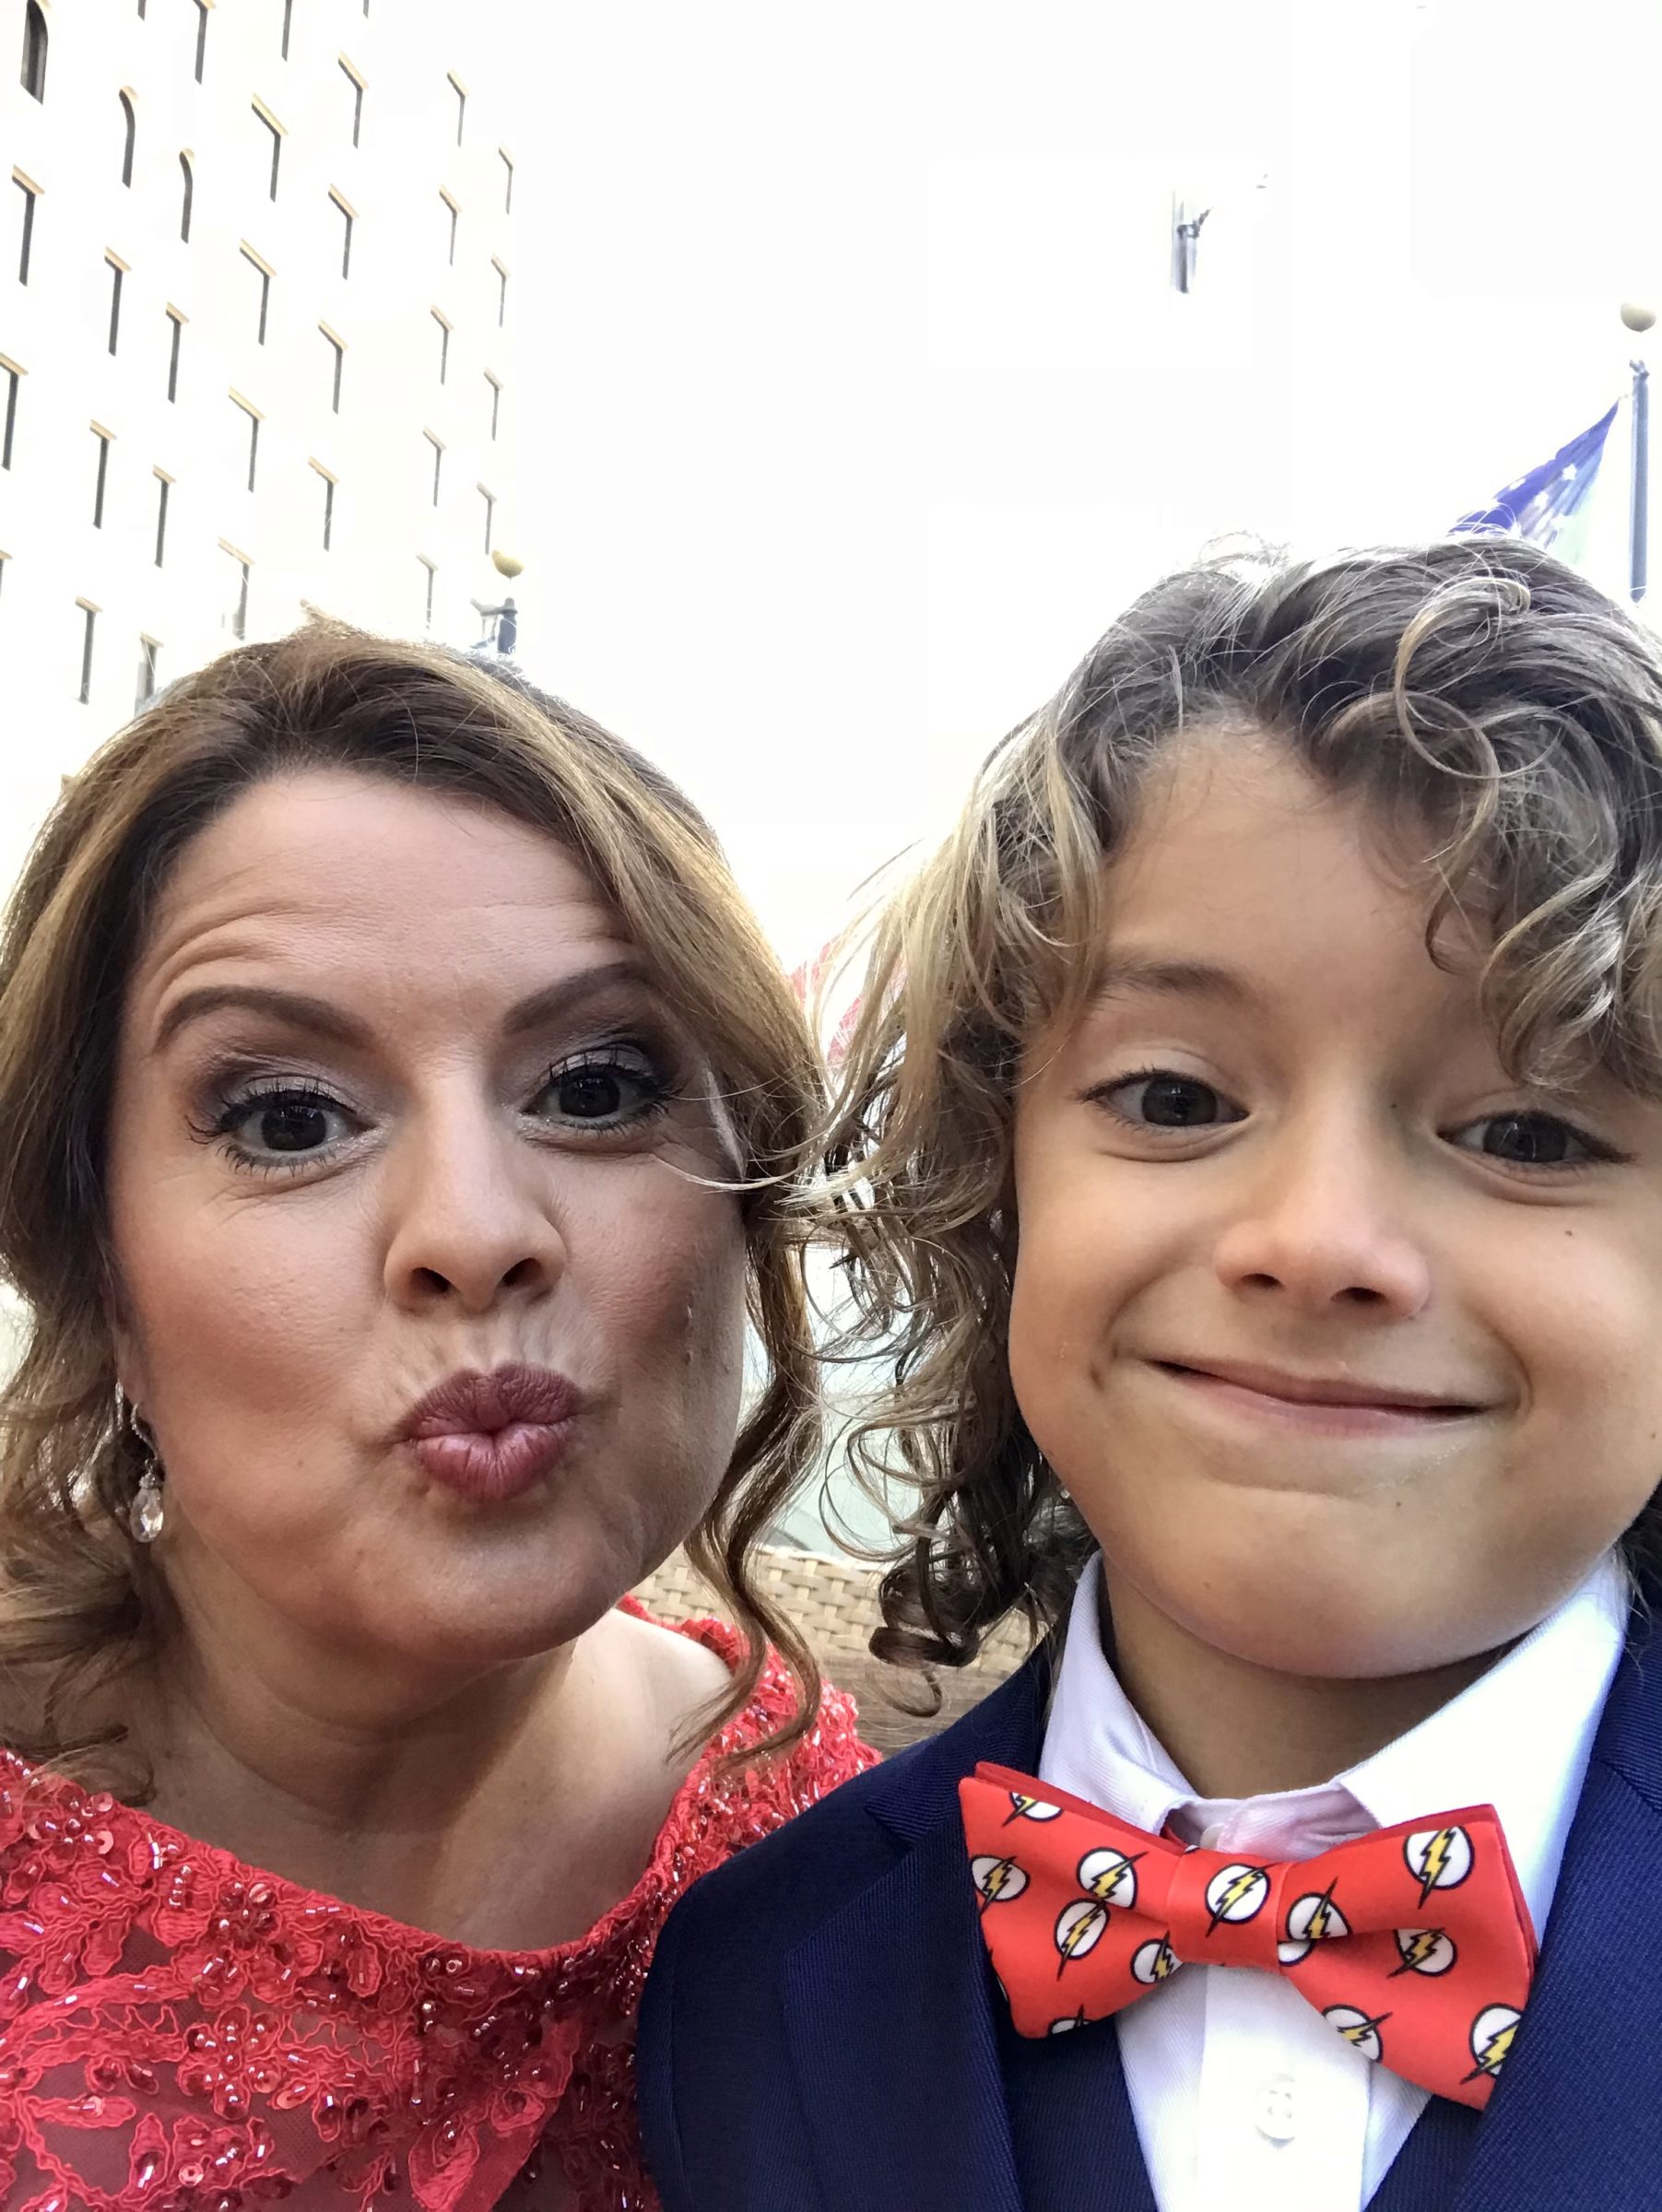 Single mother Katina Rondeau with her son.